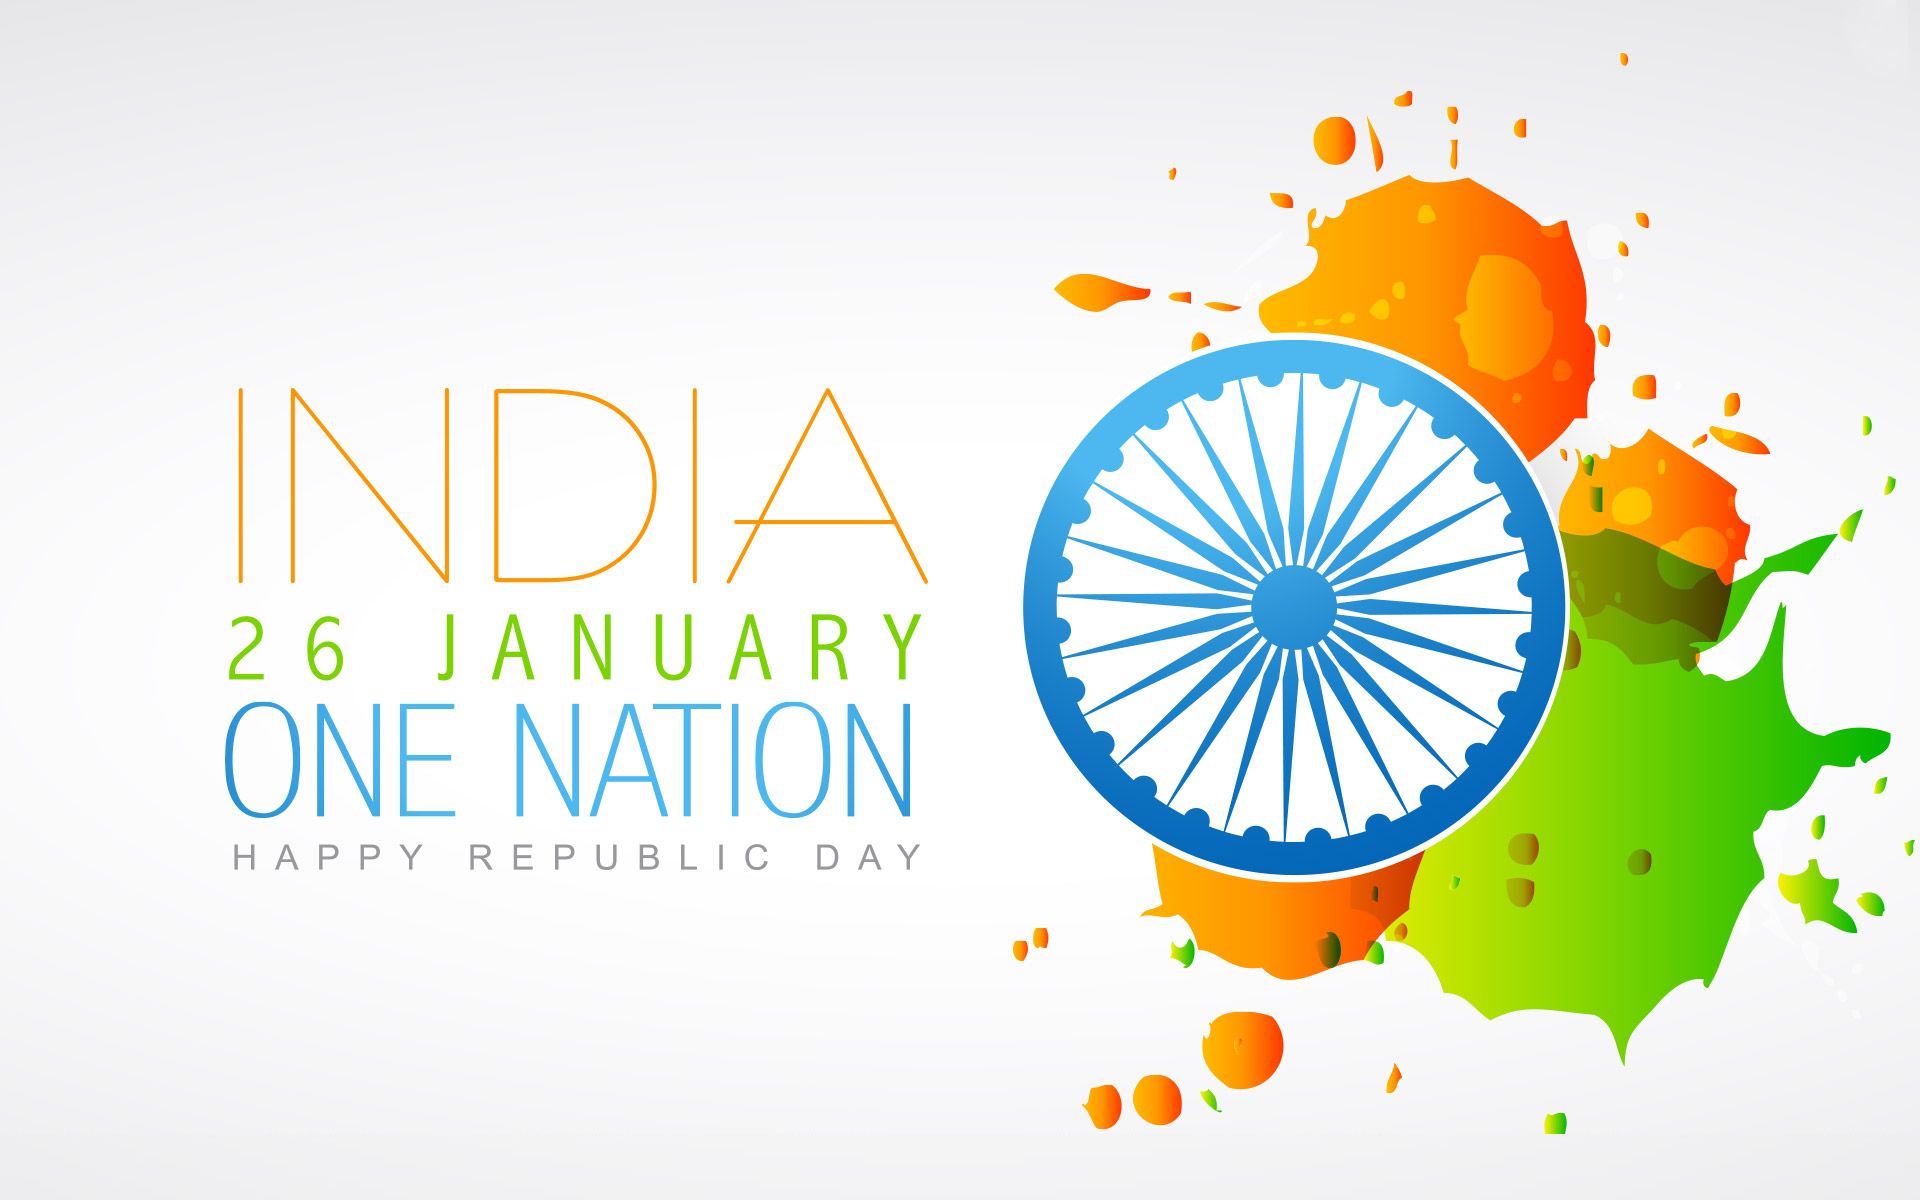 26 January 2022 : Republic Day wishes, images, quotes, and Greetings